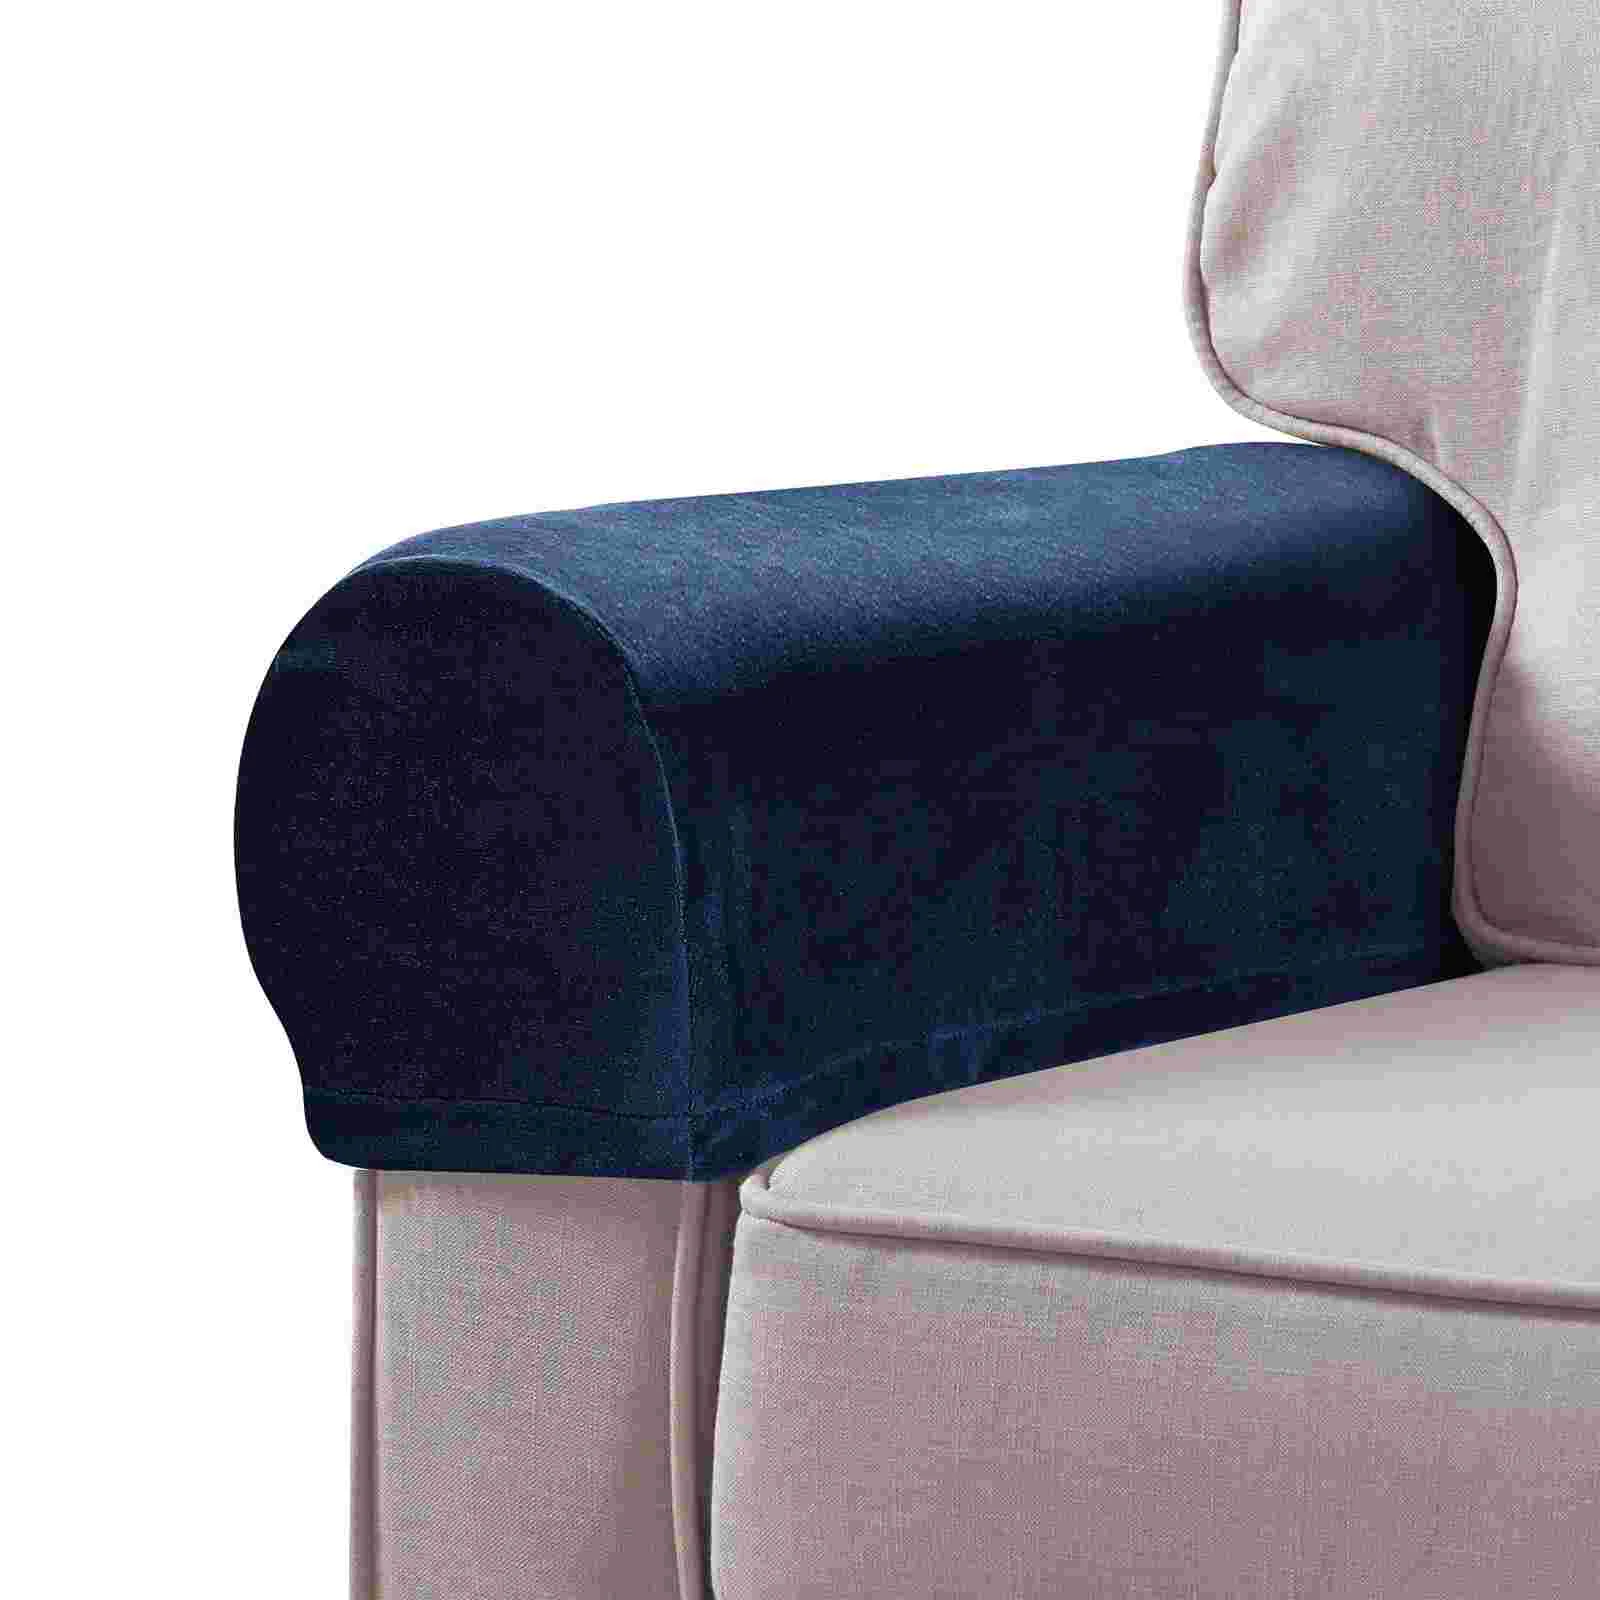 

Covers Armrest Sofa Cover Couch Armchair Chair Protector Protectors Slipcoverstretch Furniture Pillow Elastic Recliner Universal